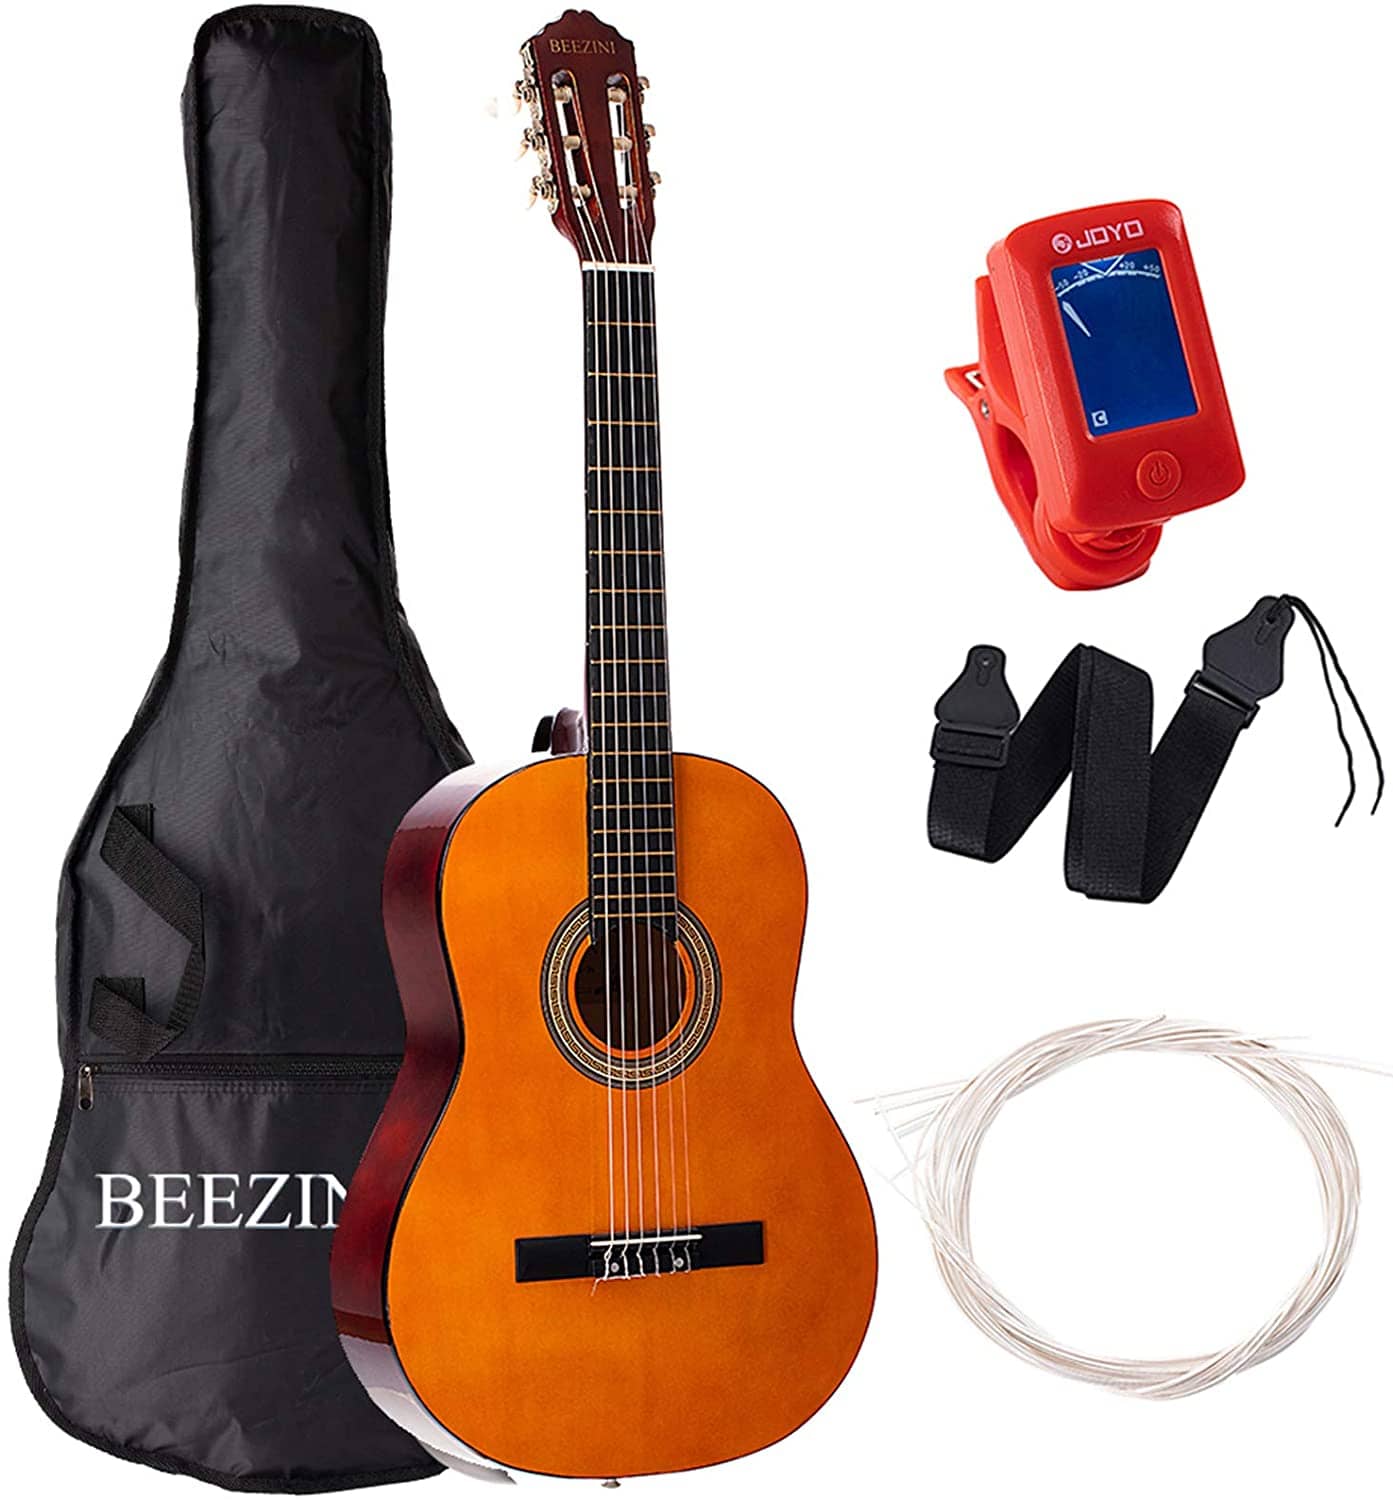 Classical Guitar Acoustic 3/4 Size 36 inch Guitar 6 Nylon Strings Guitar for Beginners Junior Kids Starter Kits with Waterproof Bag Guitar Clip Tuner Strap Extra Strings 16